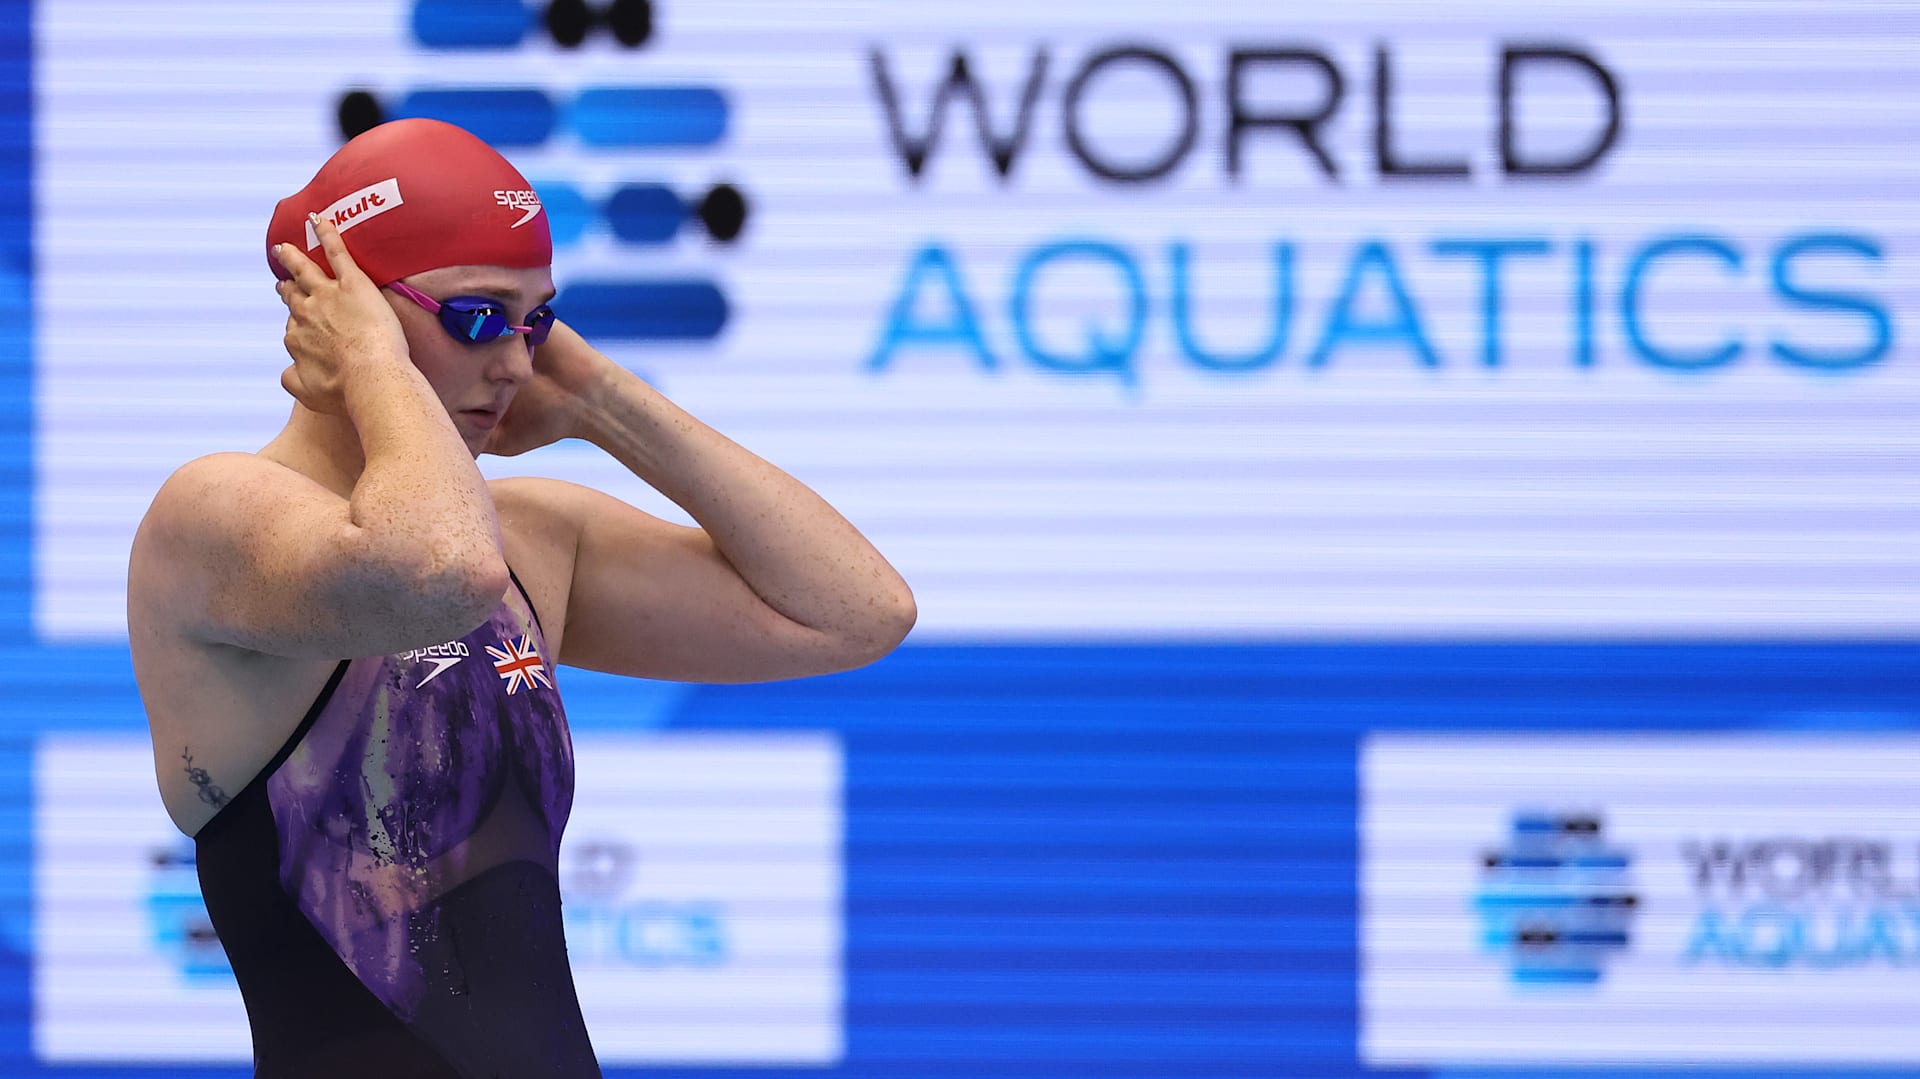 France Names 32 Swimmers to 2023 World Championships Team